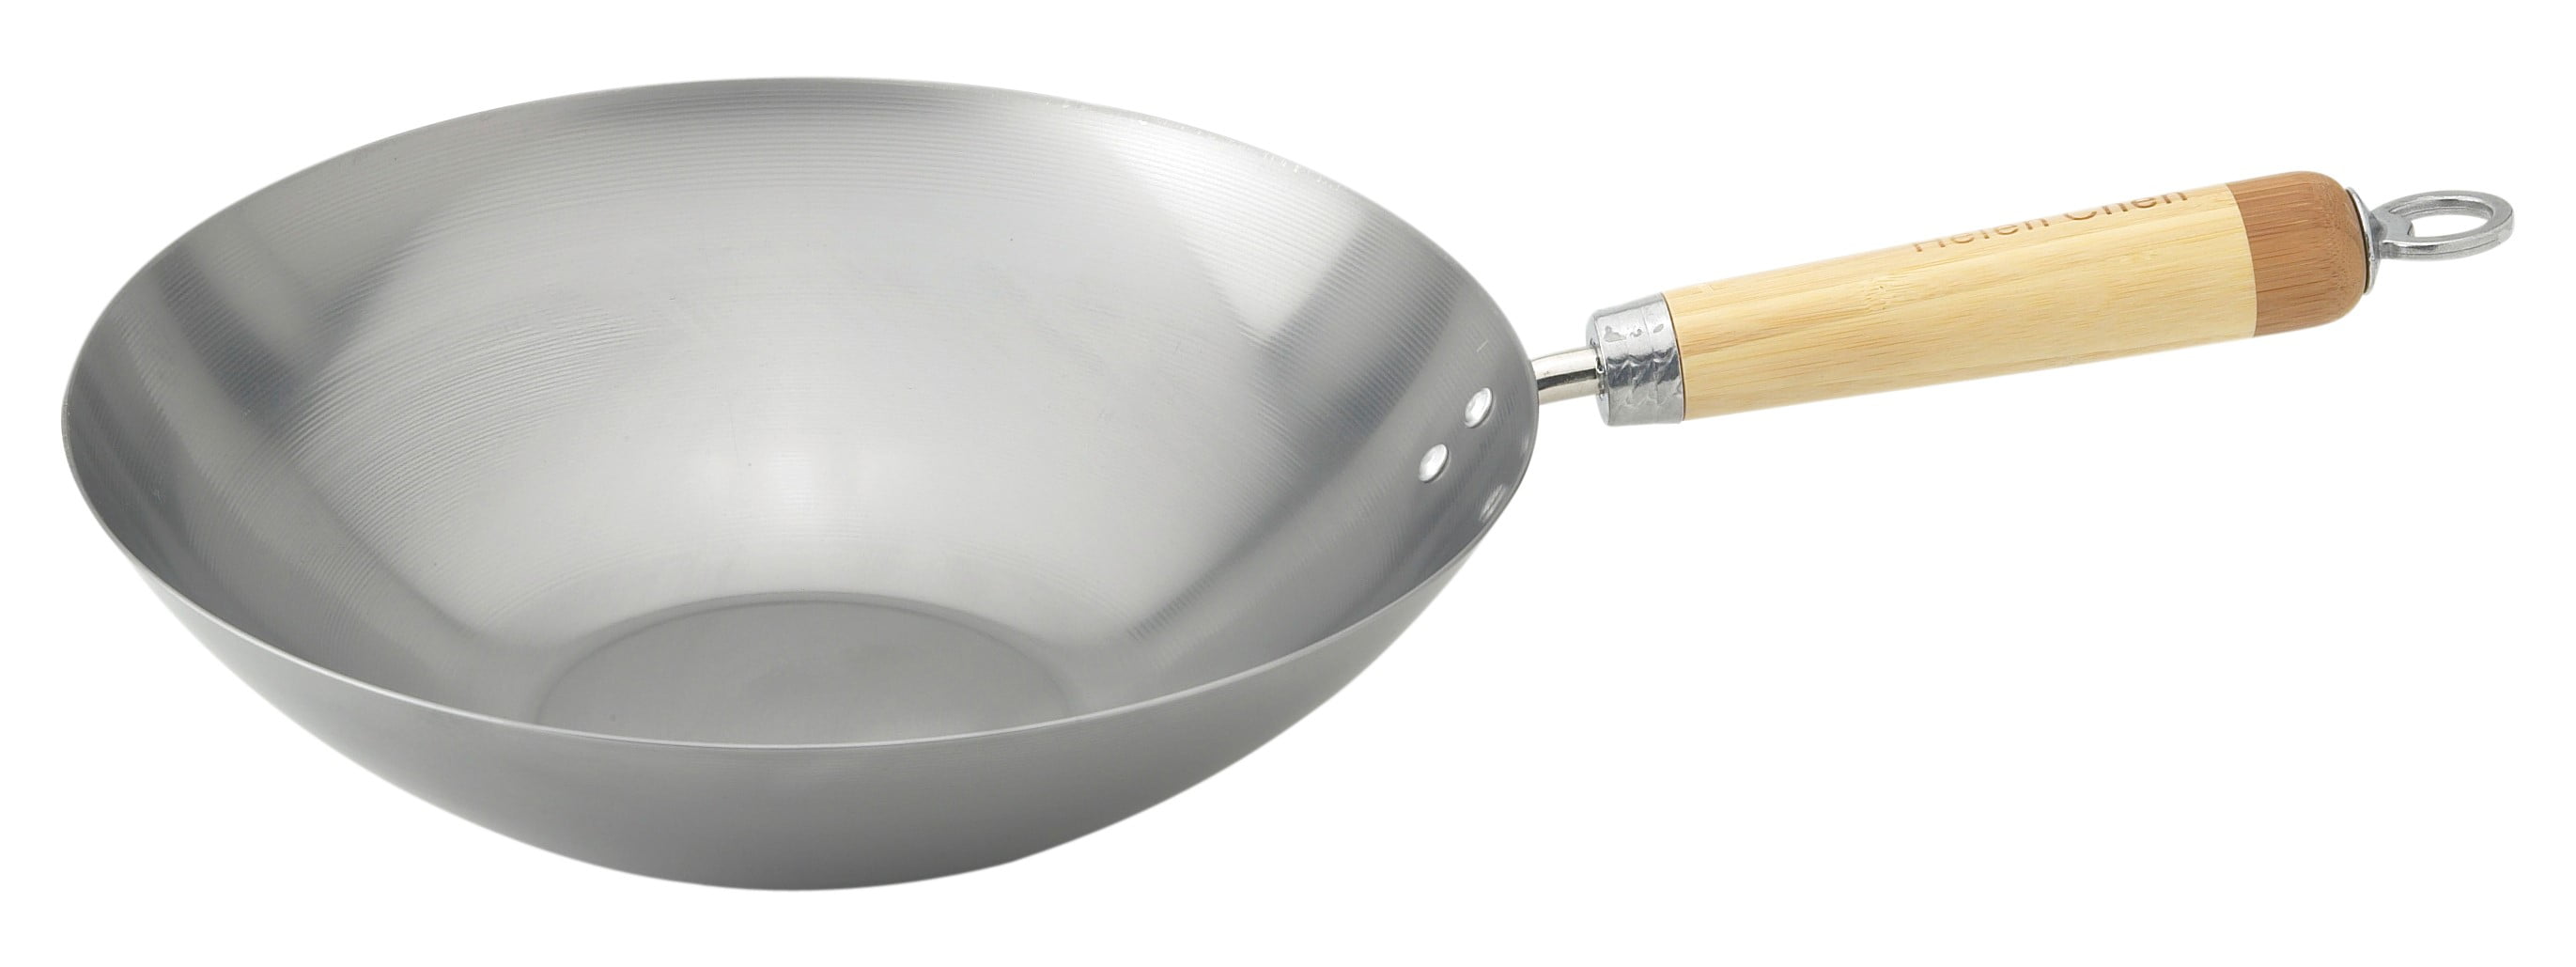 Copper Carbon Steel Induction Wok Chinese Stir Fry Non Stick Frying Pan 30cm 12" 